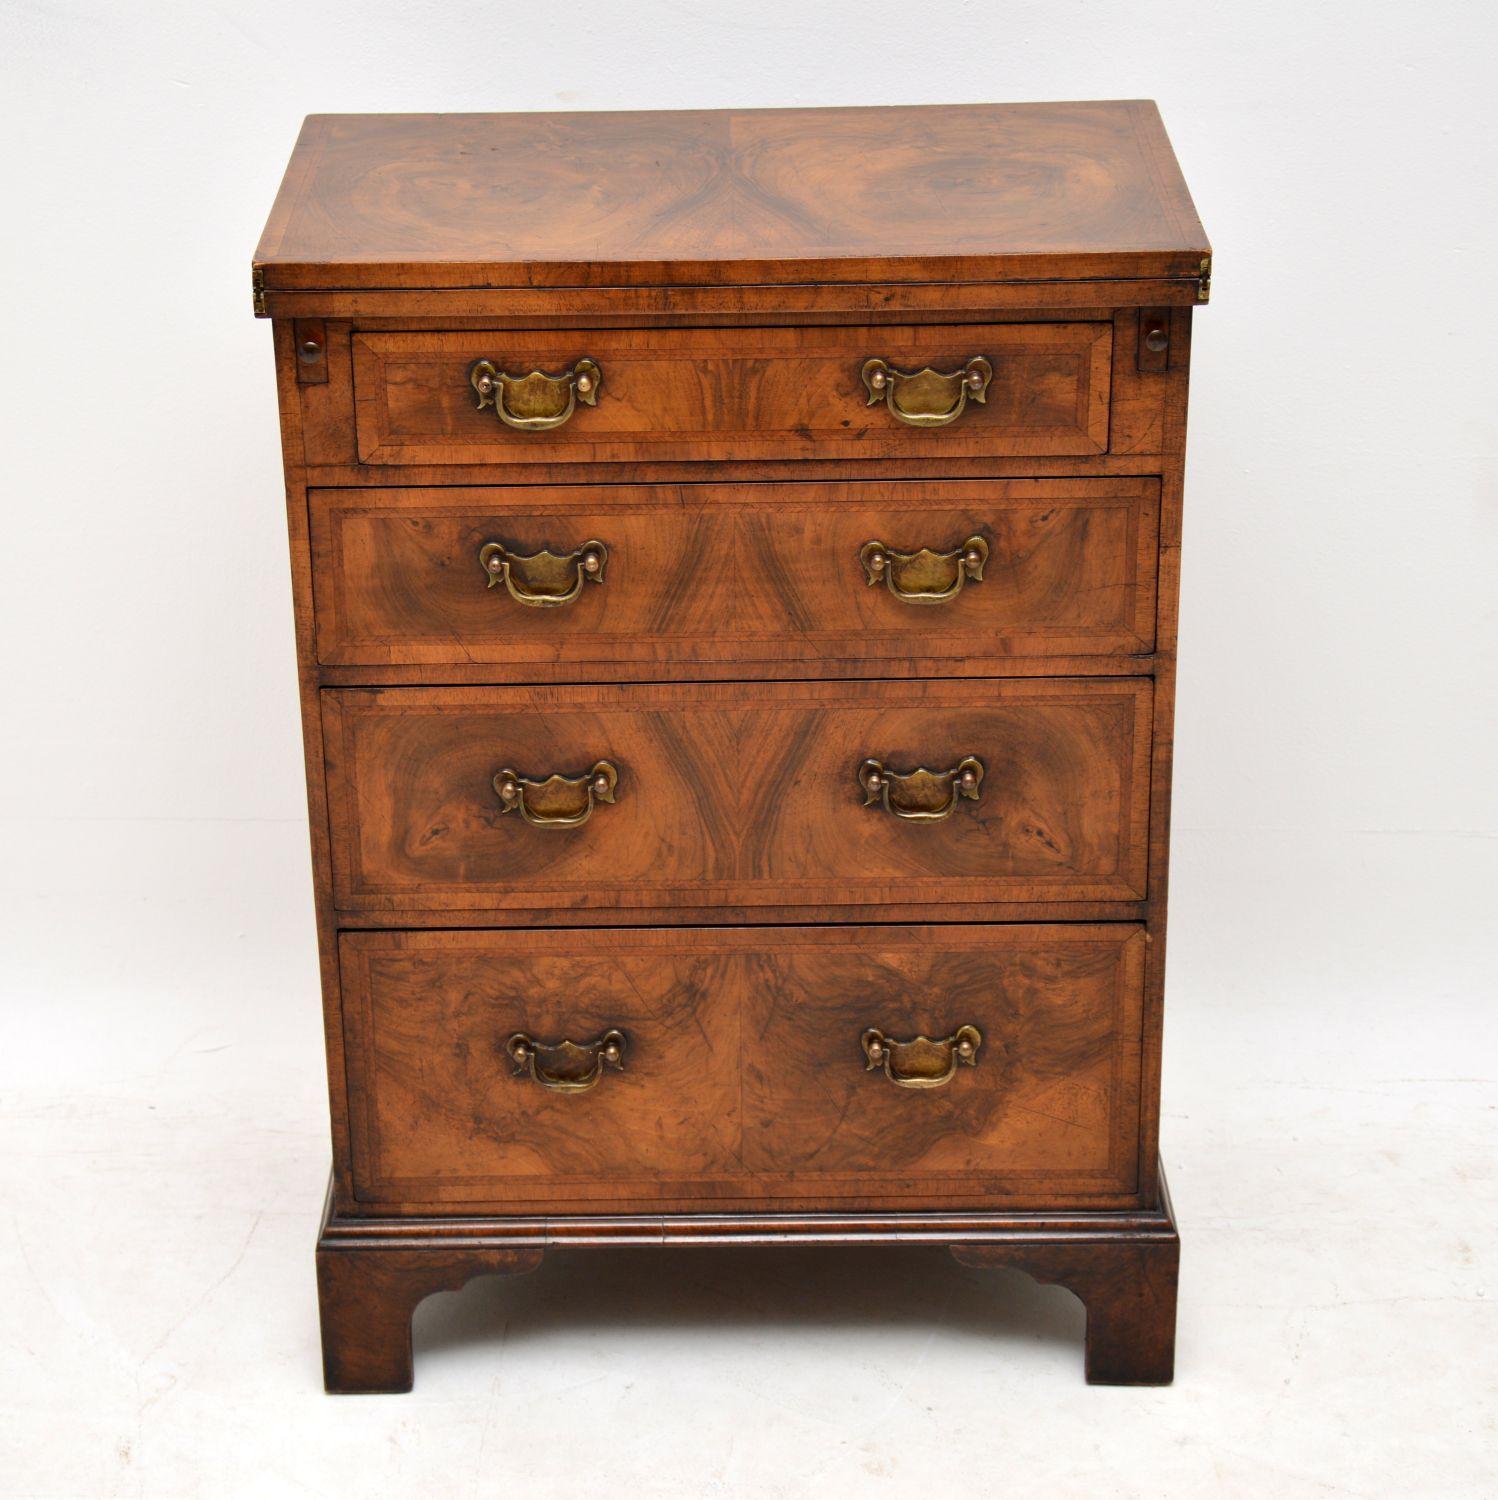 Small antique George III burr walnut bachelors chest of drawers in excellent condition and dating to circa 1910 period. This chest of drawers is of extremely high quality and the burr walnut veneers have beautiful bookmarked patterns running down